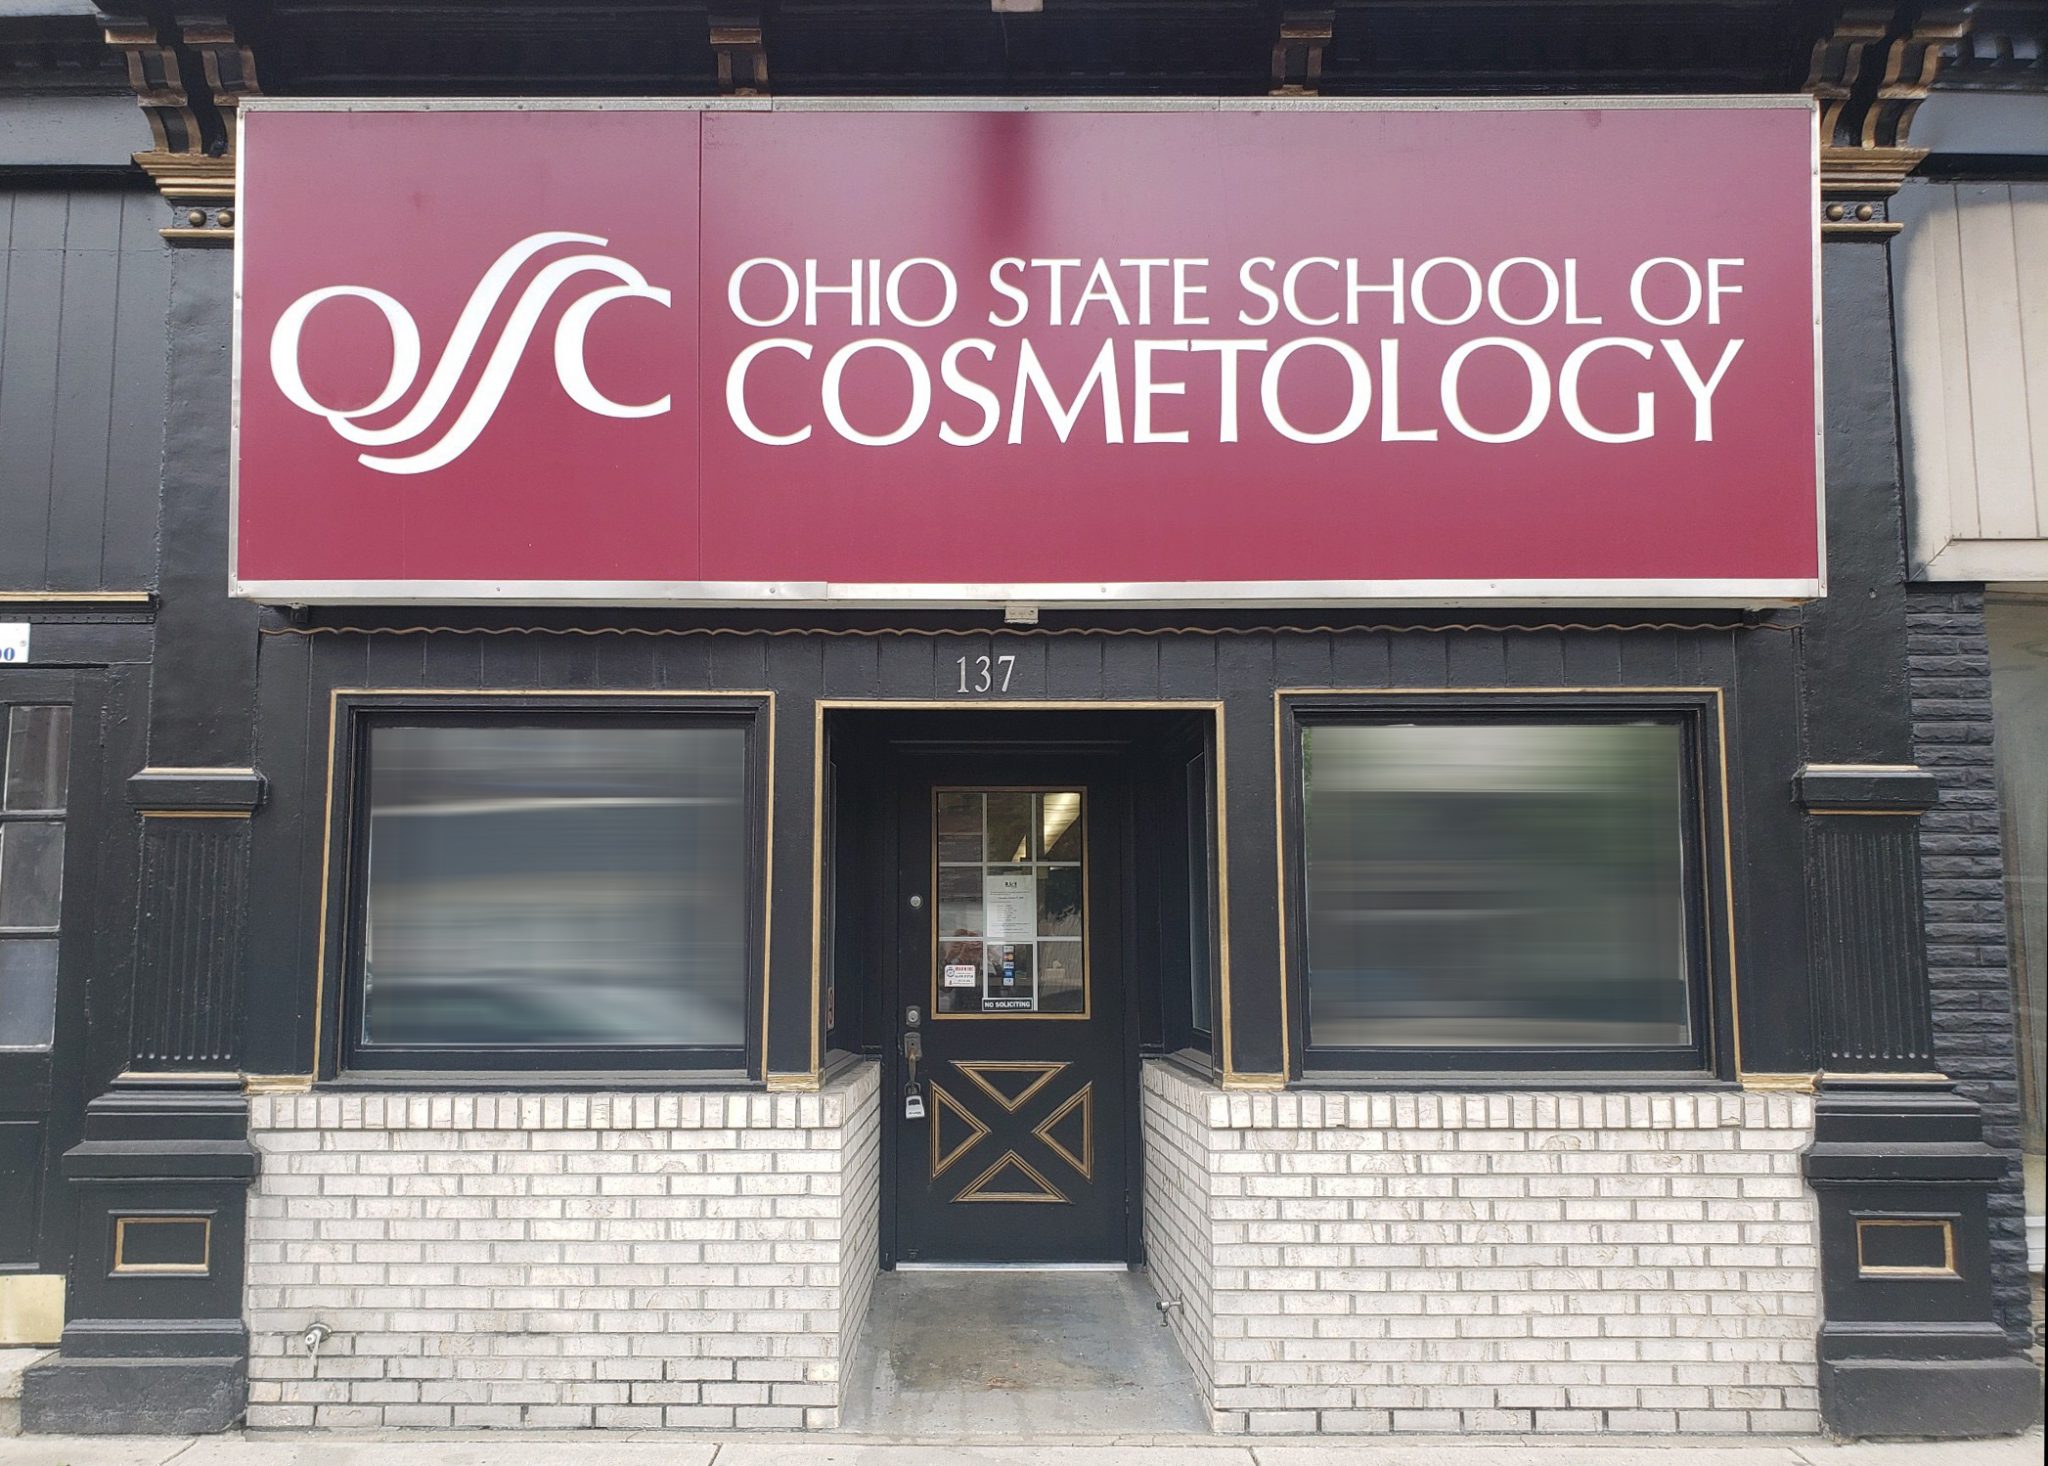 2. The Ohio State School of Cosmetology - wide 8